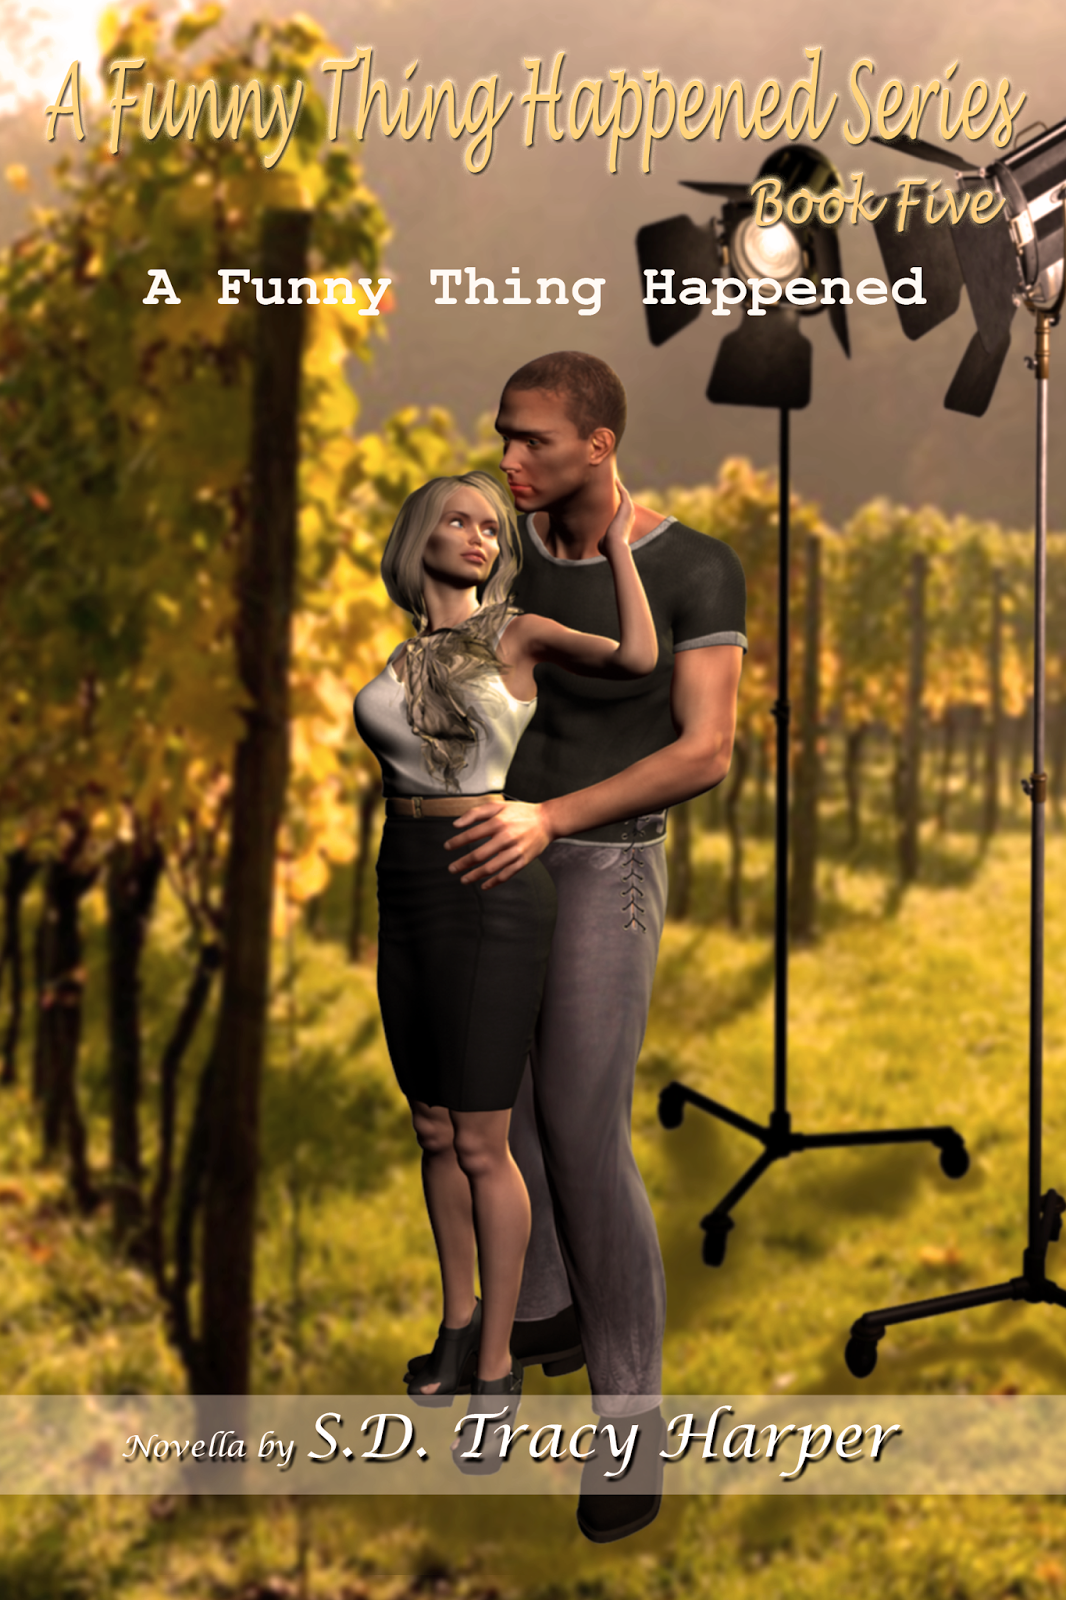   A Funny Thing Happened Book Five